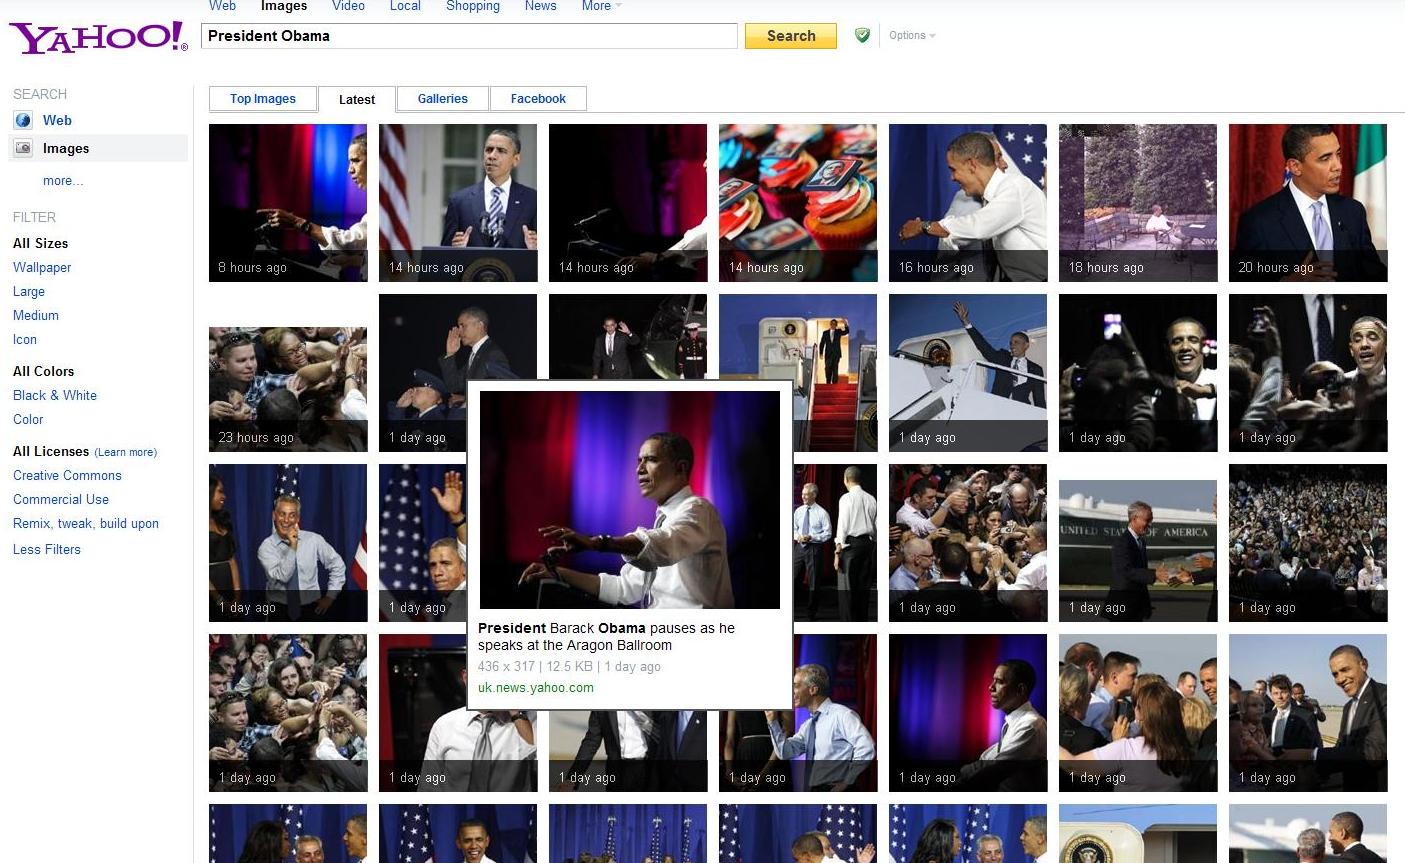 Yahoo! Images nouvelle interface